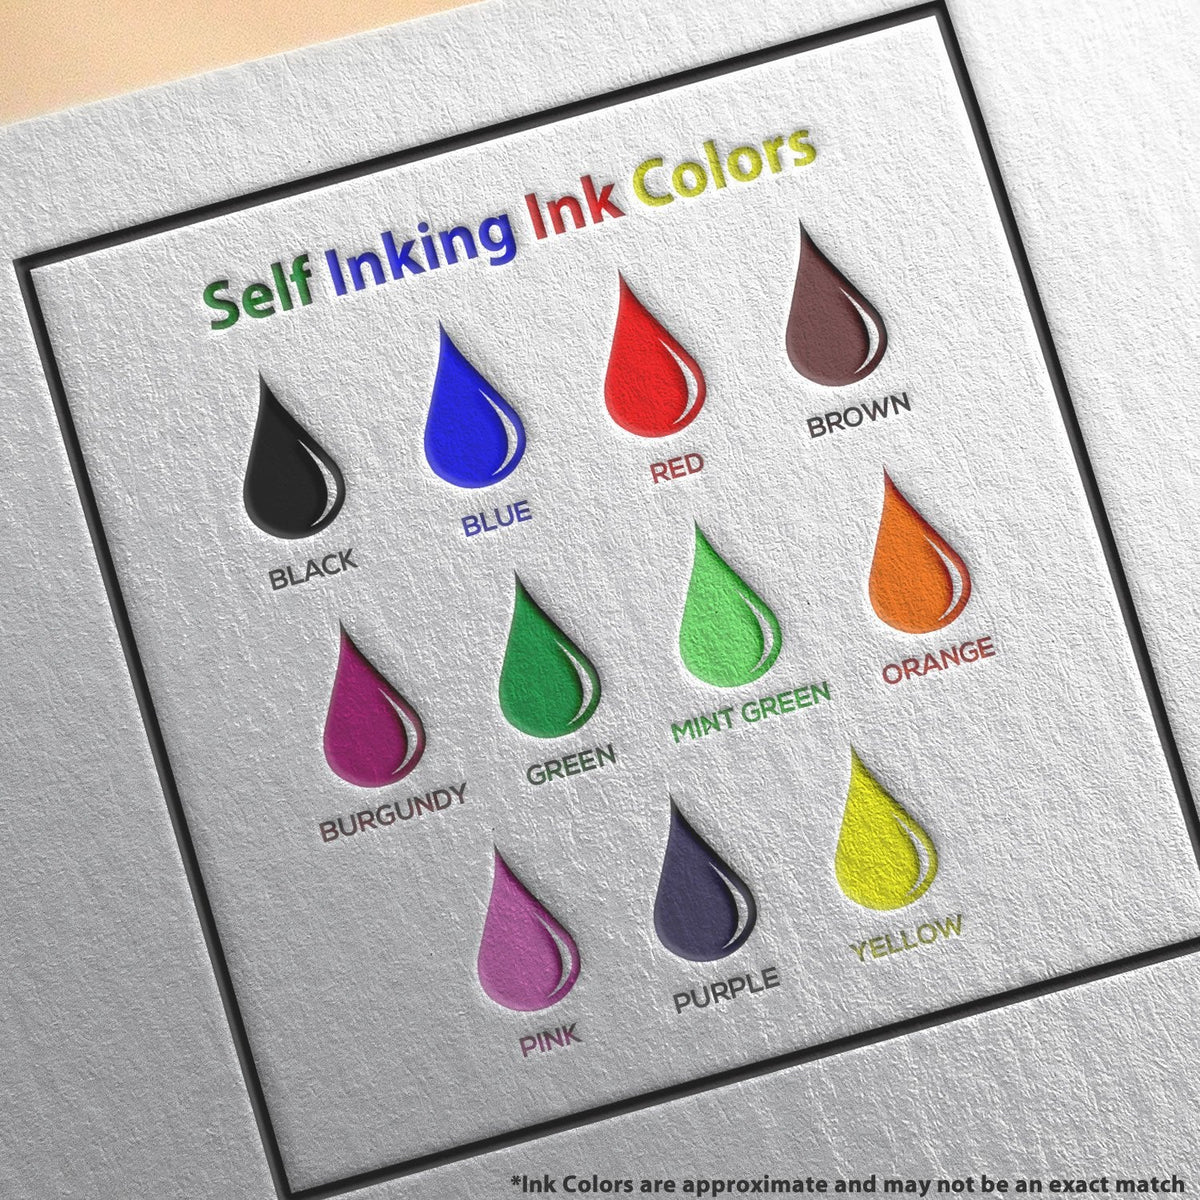 Self-Inking Late with Border Stamp Ink Color Options